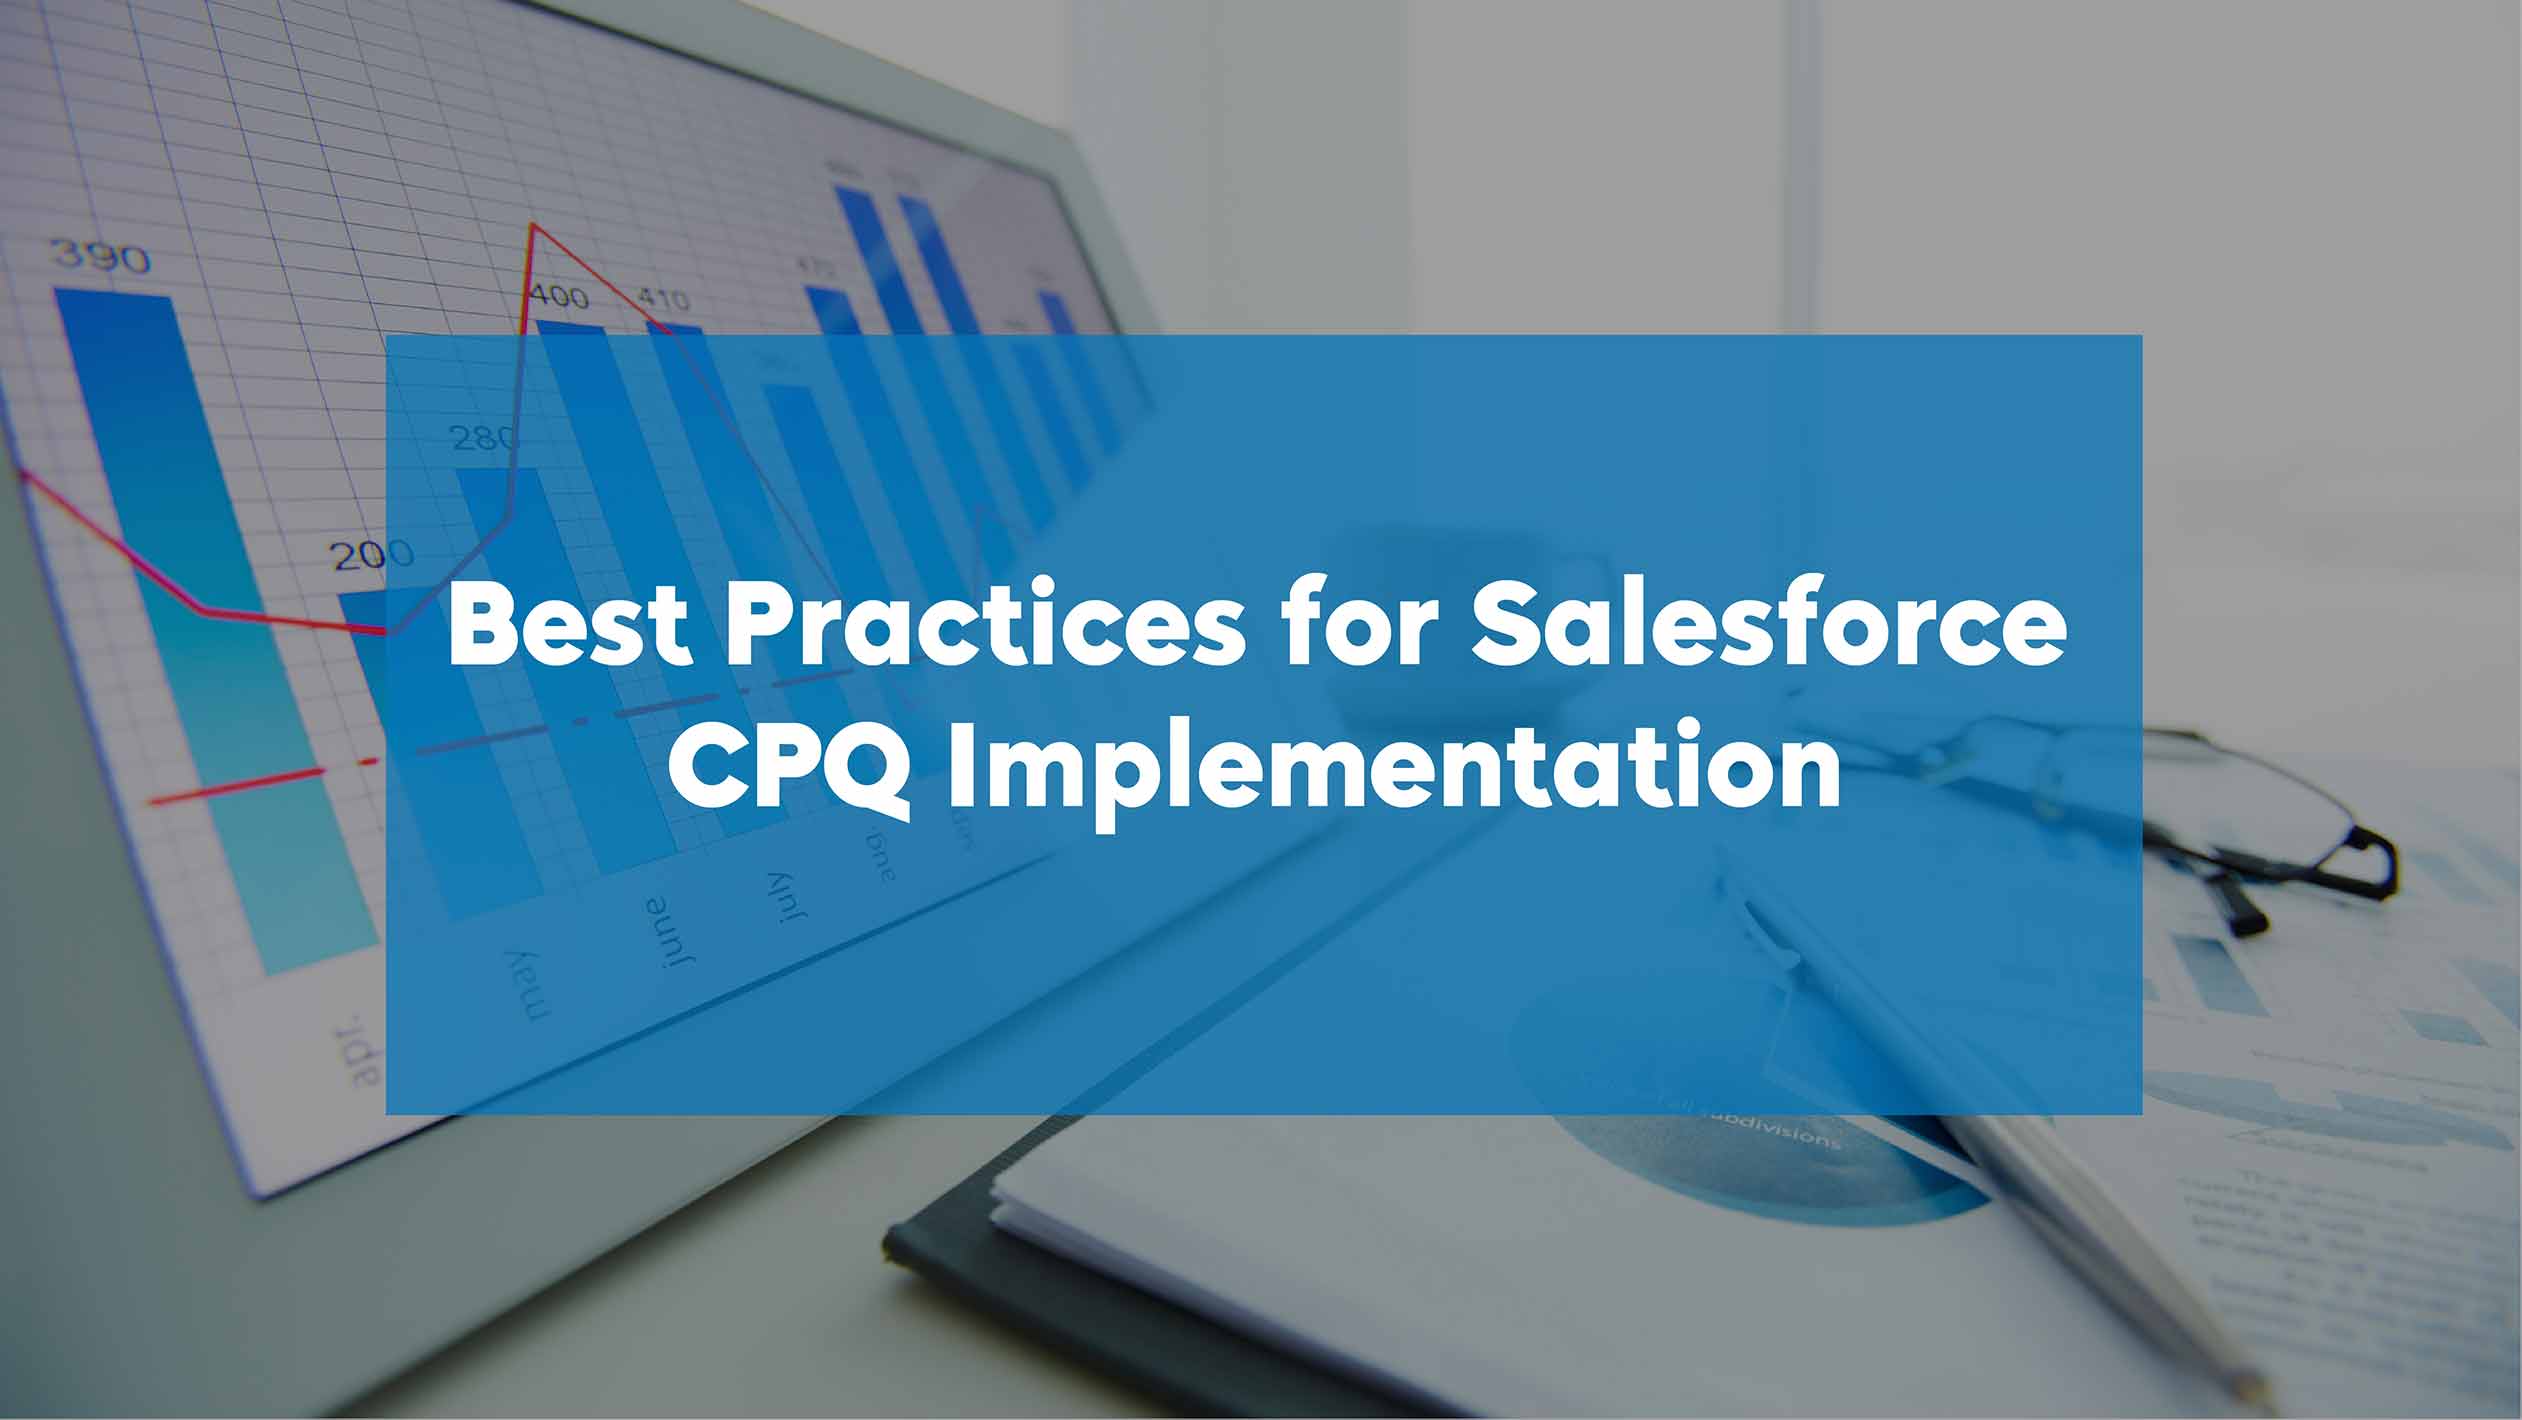 Best Practices for Salesforce CPQ Implementation 2